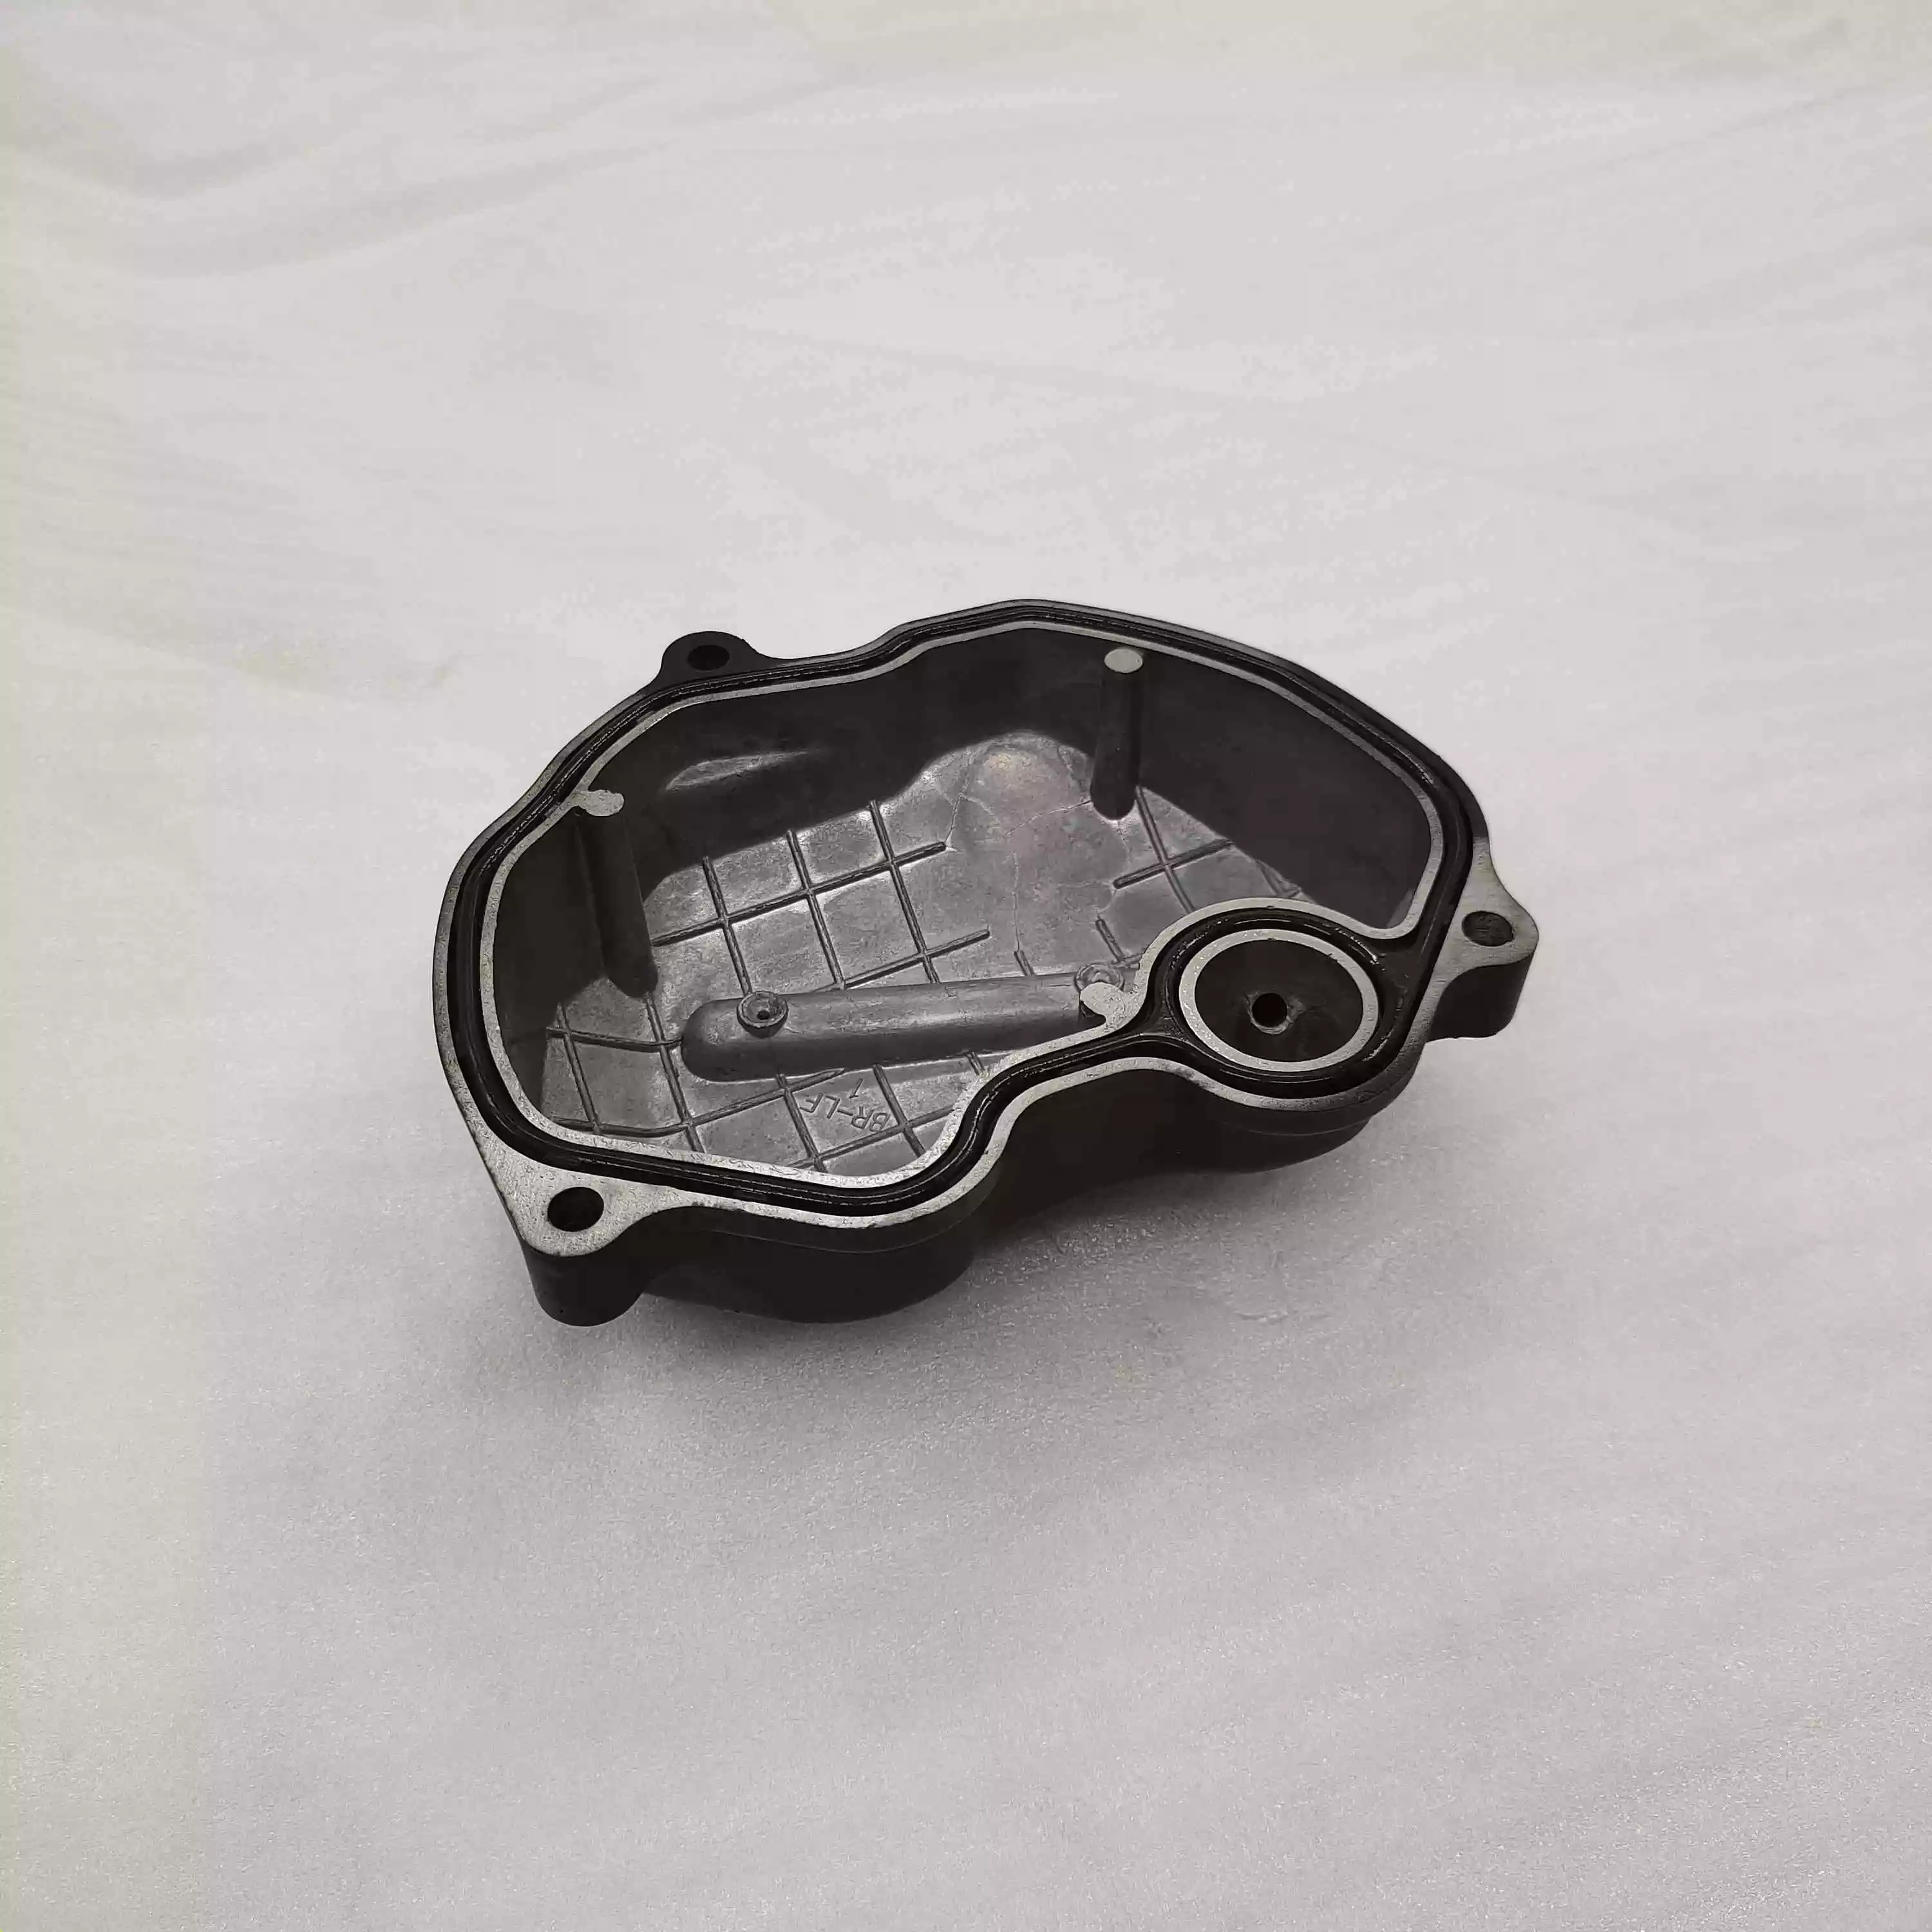 China manufacturer sale High quality Wholesale Cylinder Head Cover auto engine parts Retail motorcycle accessories